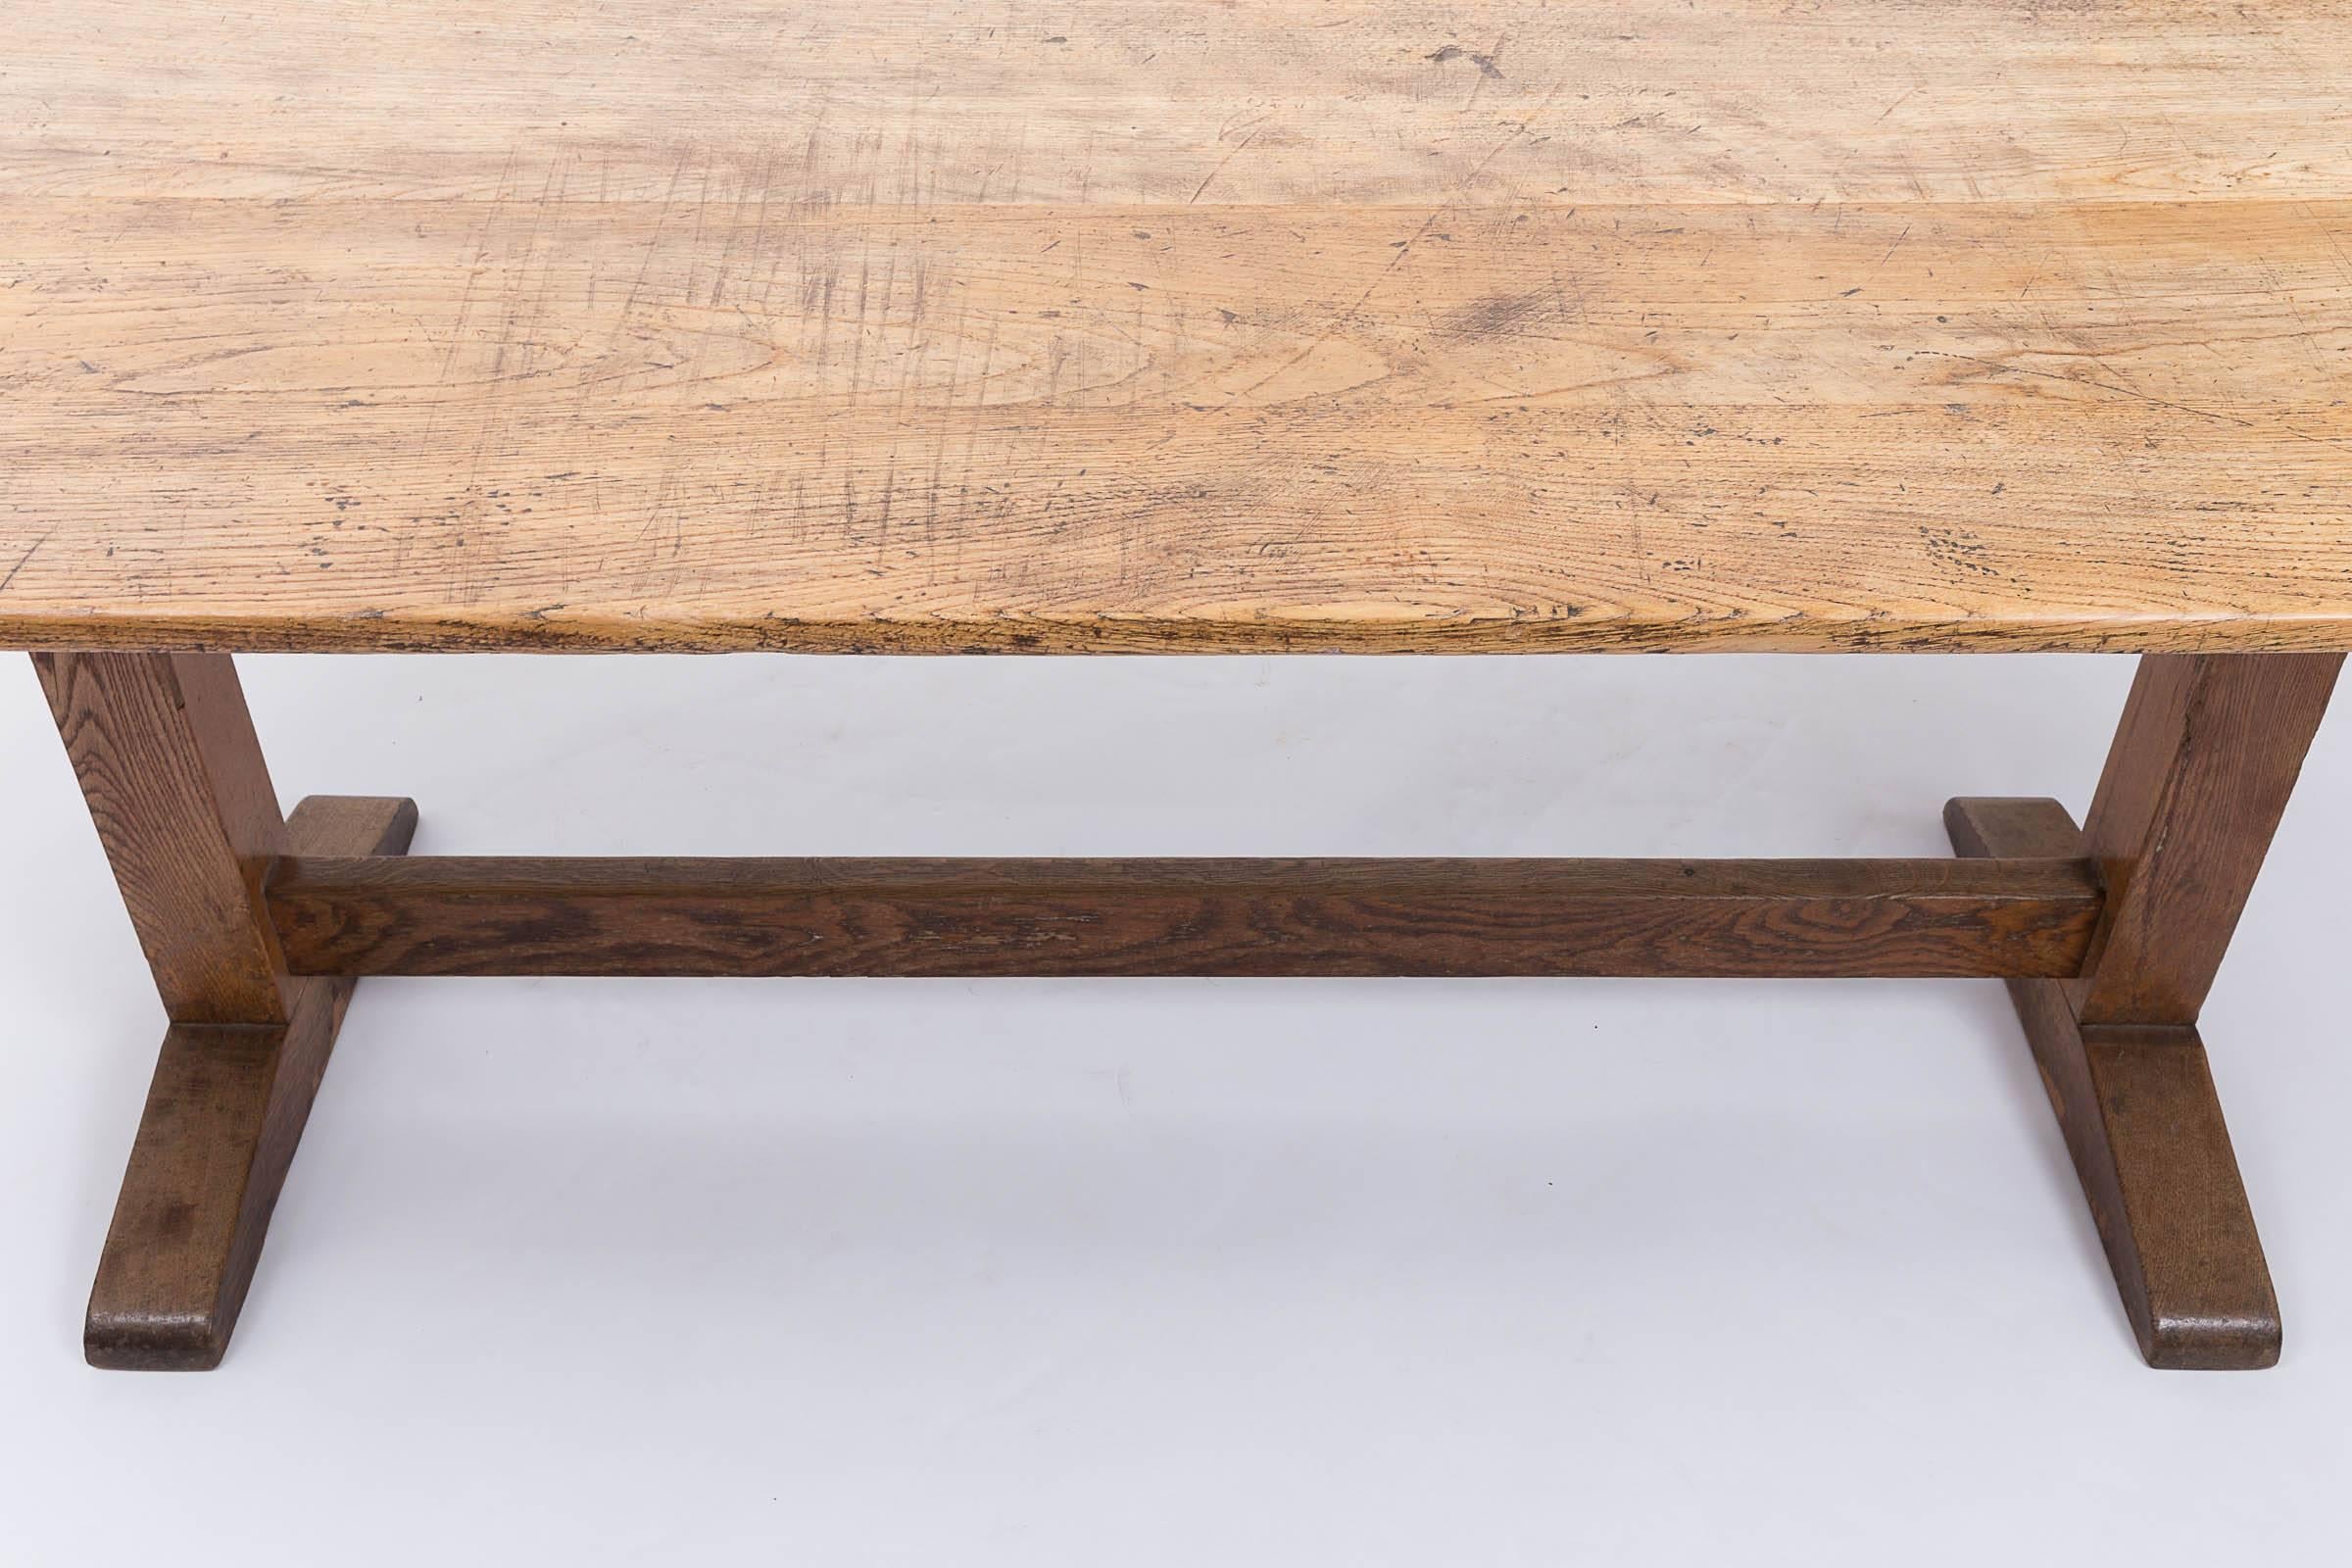 Seven foot trestle dining table with oak top and elm stretcher and legs.